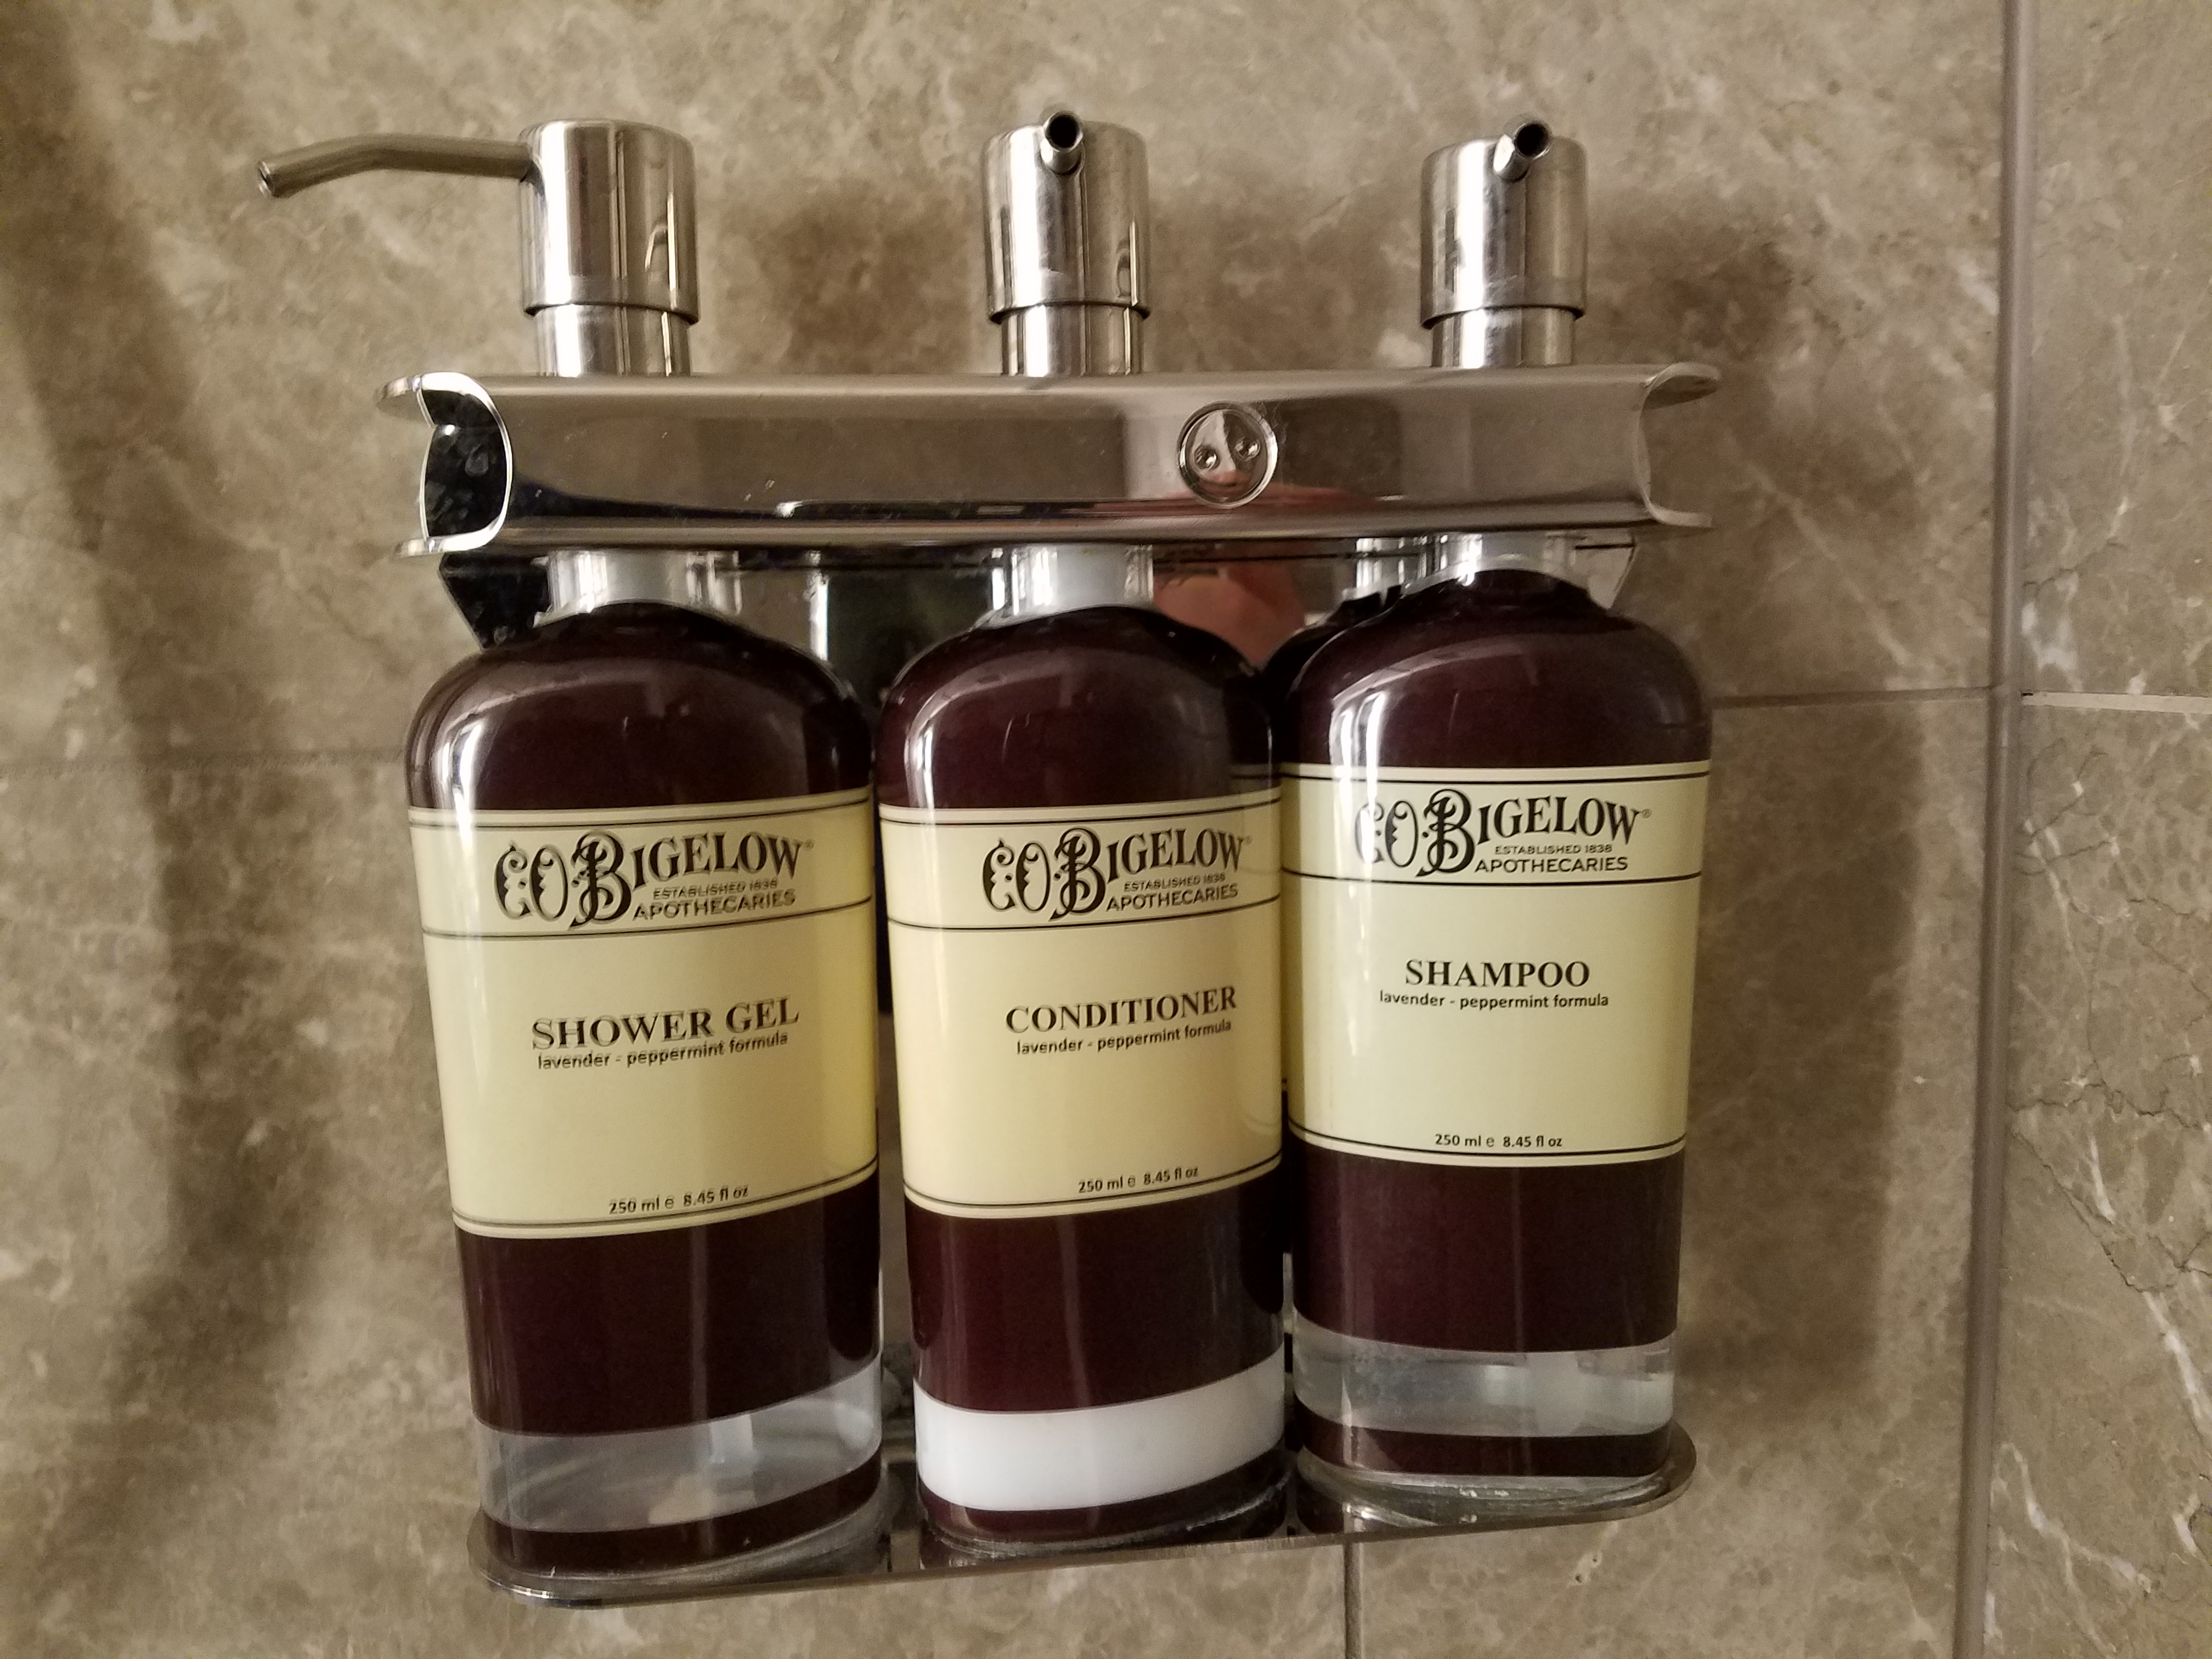 Hotels Switching to Wall-Mounted Soap, Shampoo Dispensers - Wheelchair  Travel